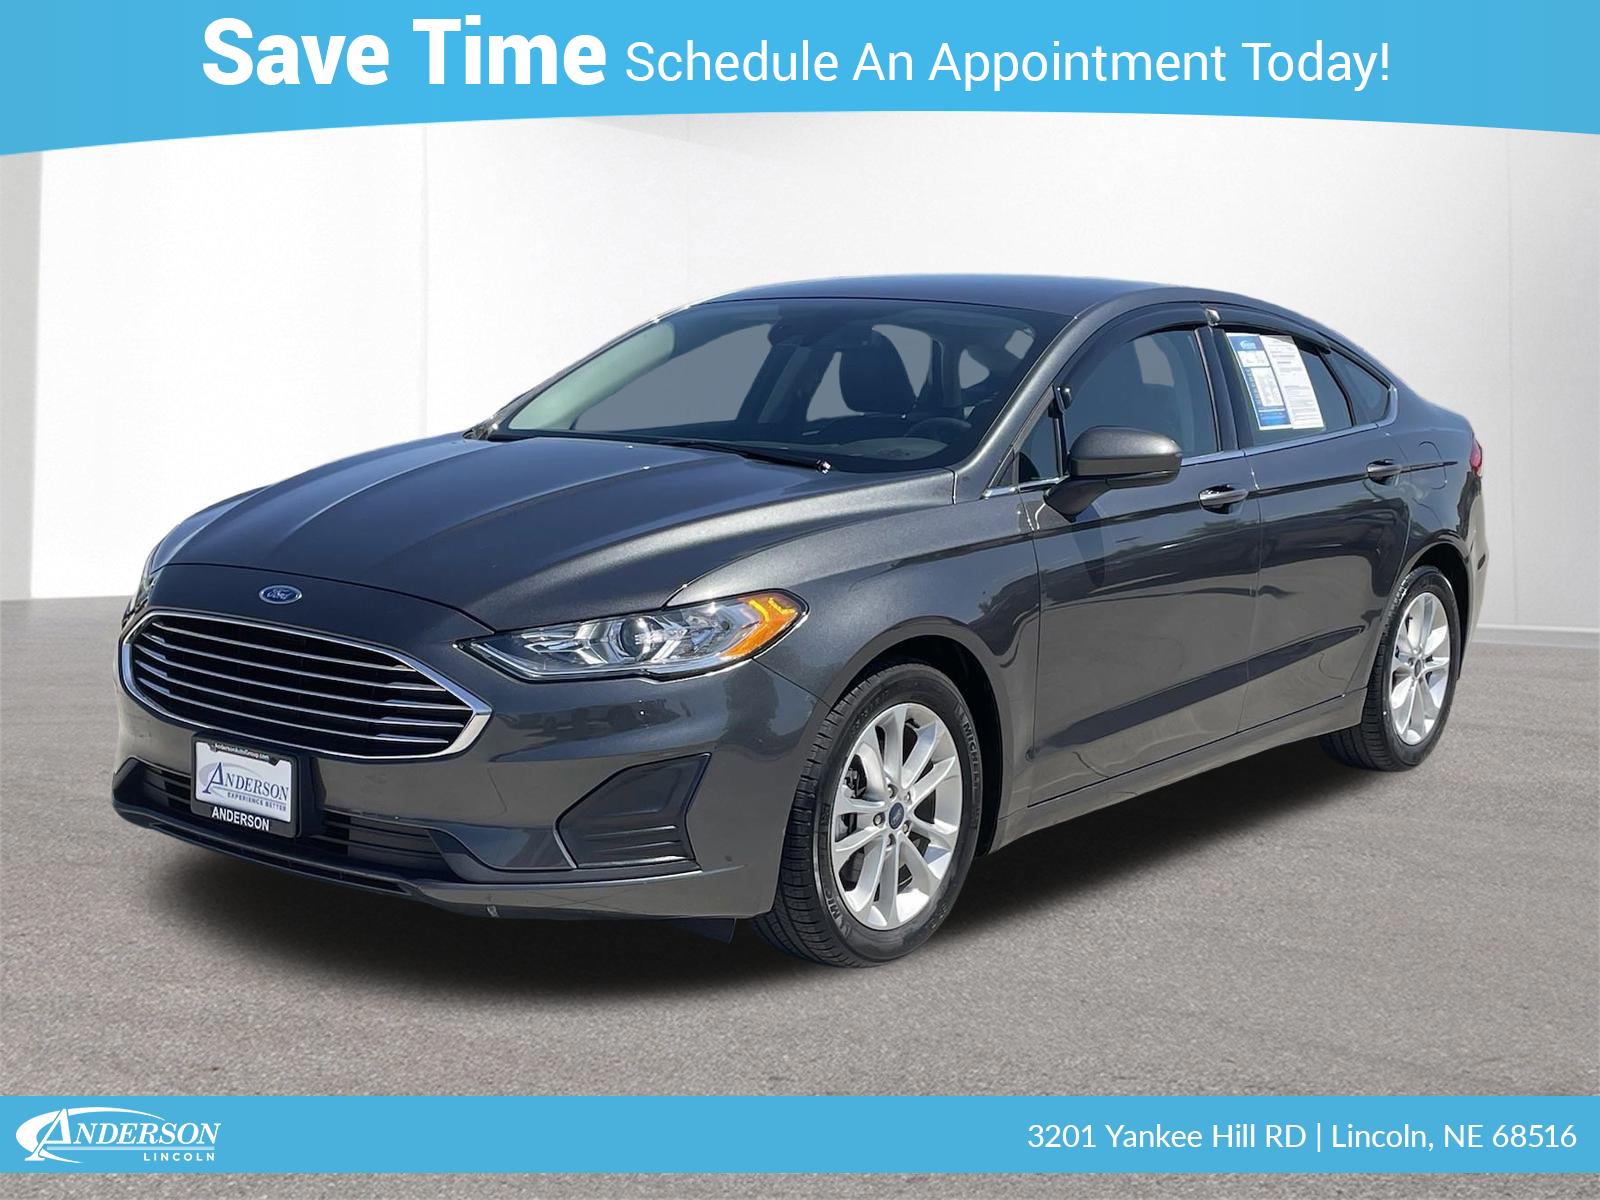 Used 2020 Ford Fusion SE Stock: 4002007